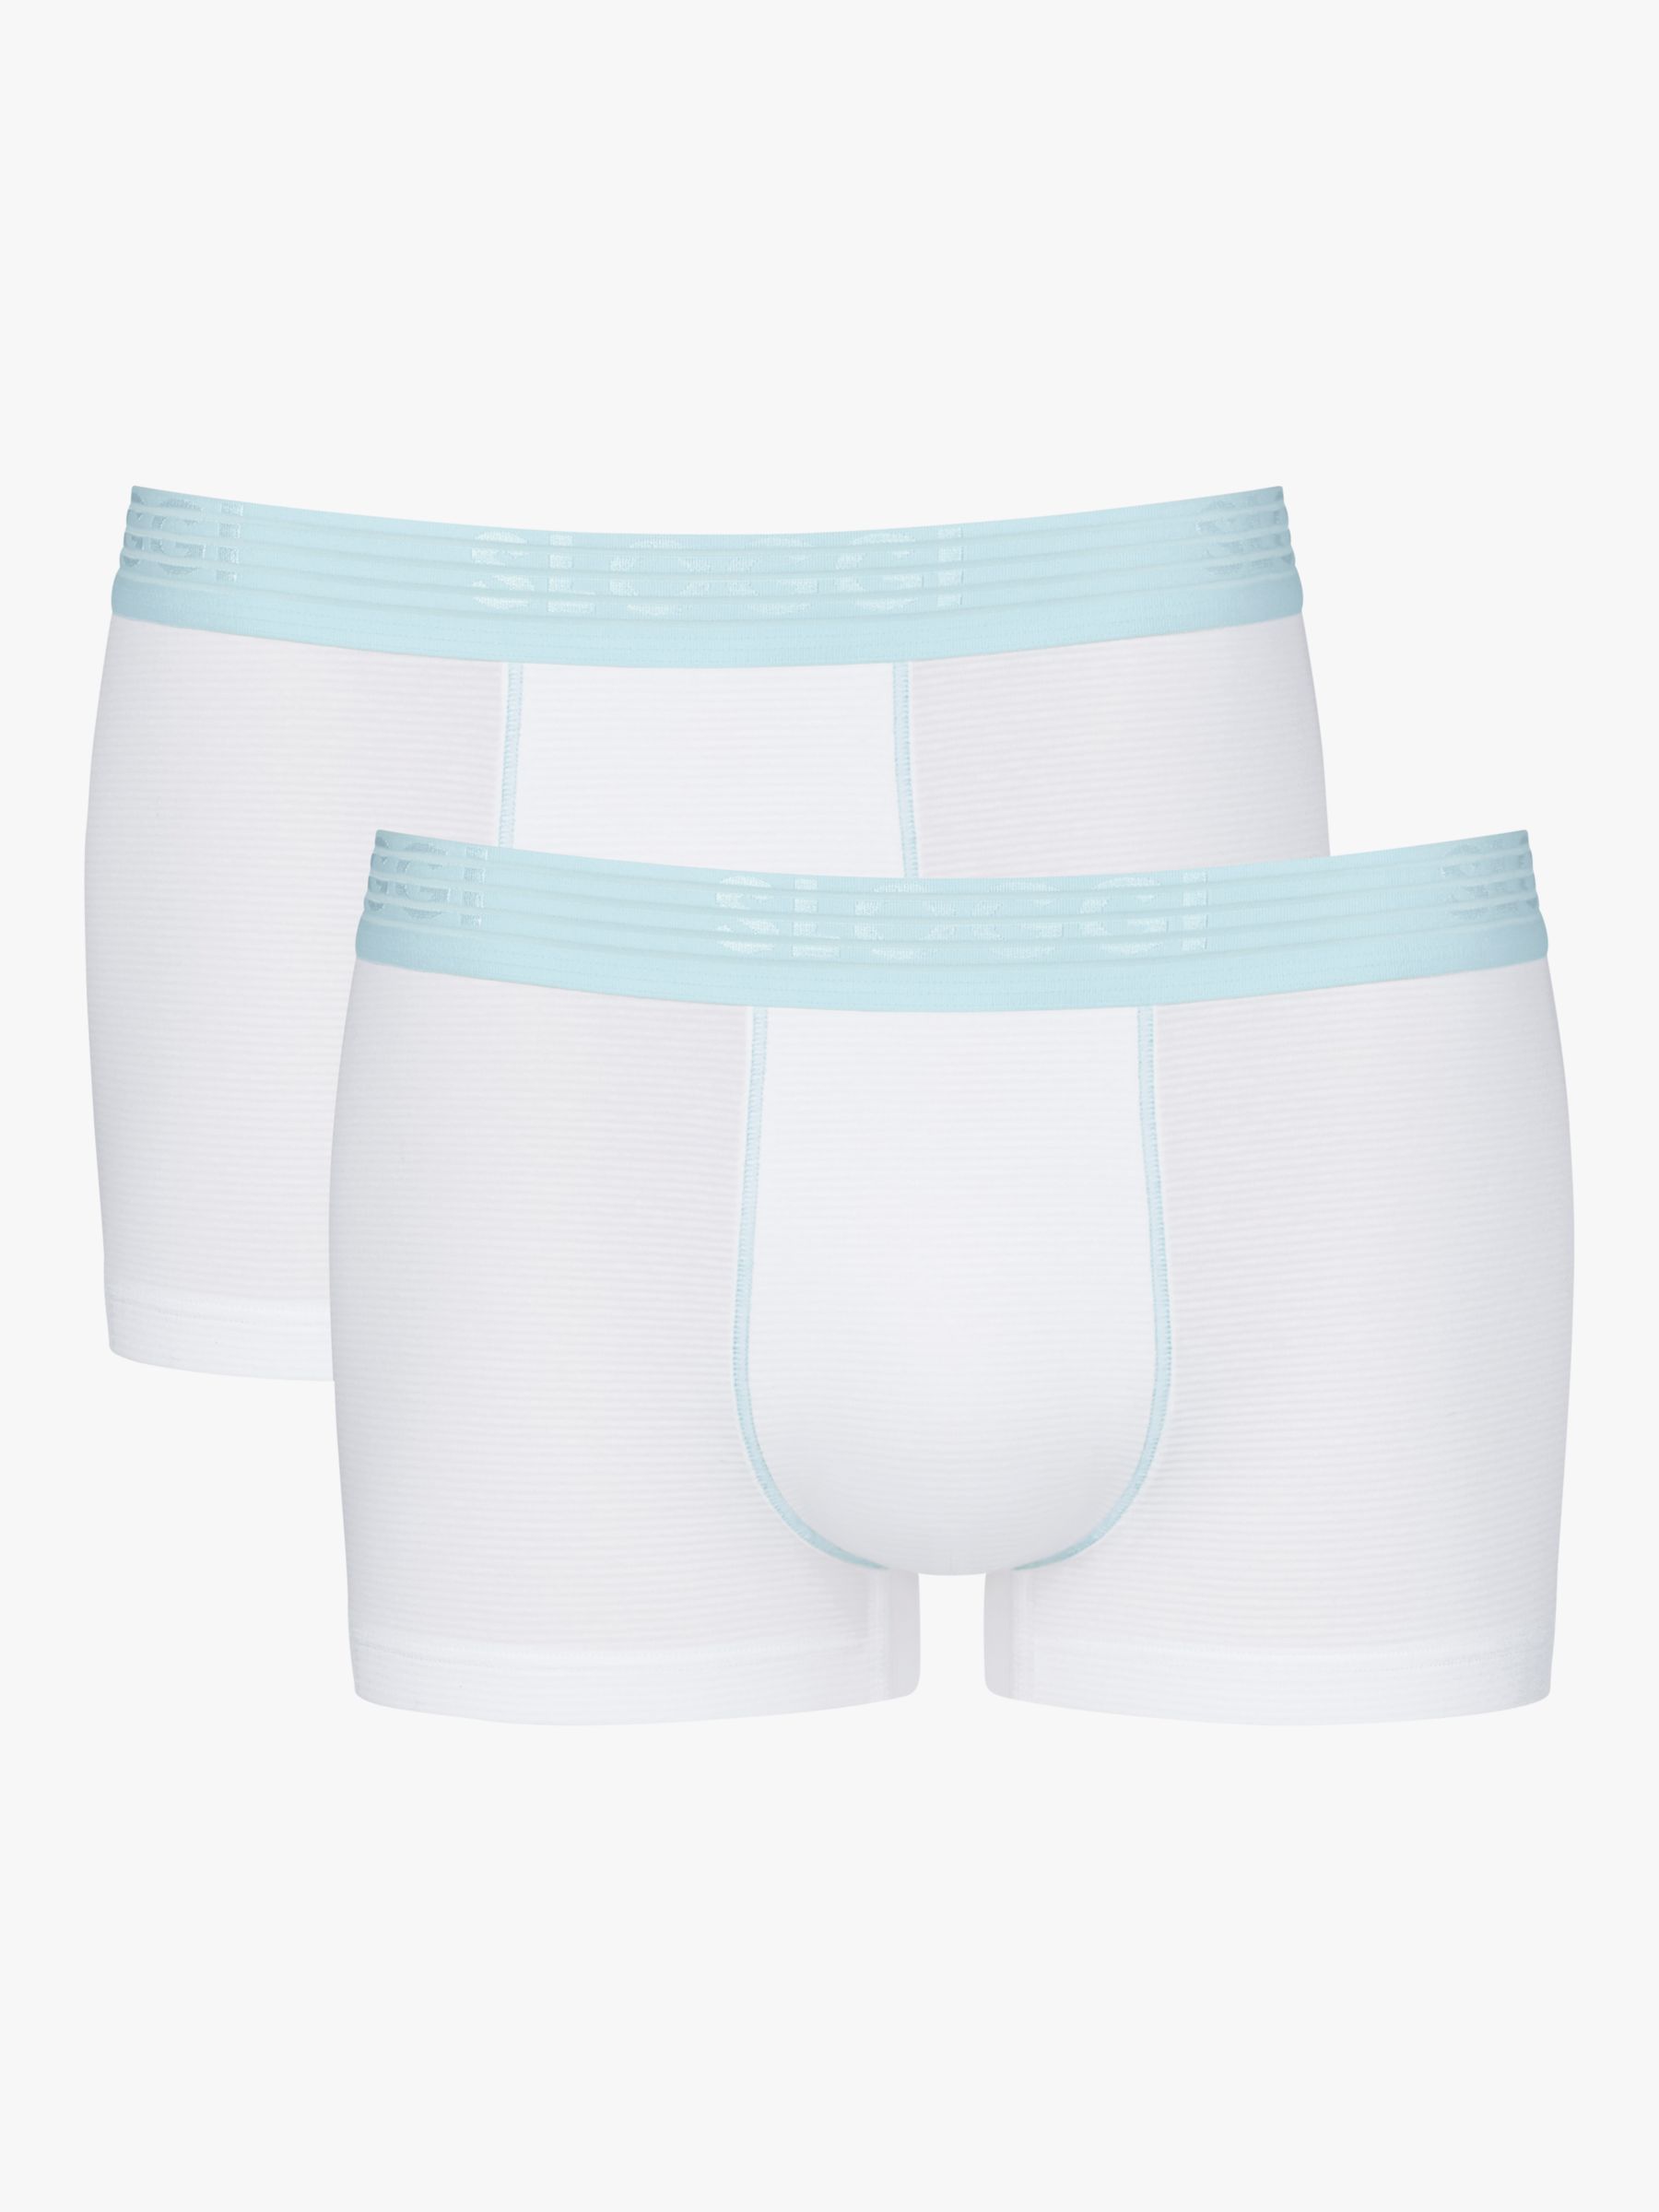 sloggi EVER Cool Cotton Stretch Hipster Trunks, Pack of 2, White, L